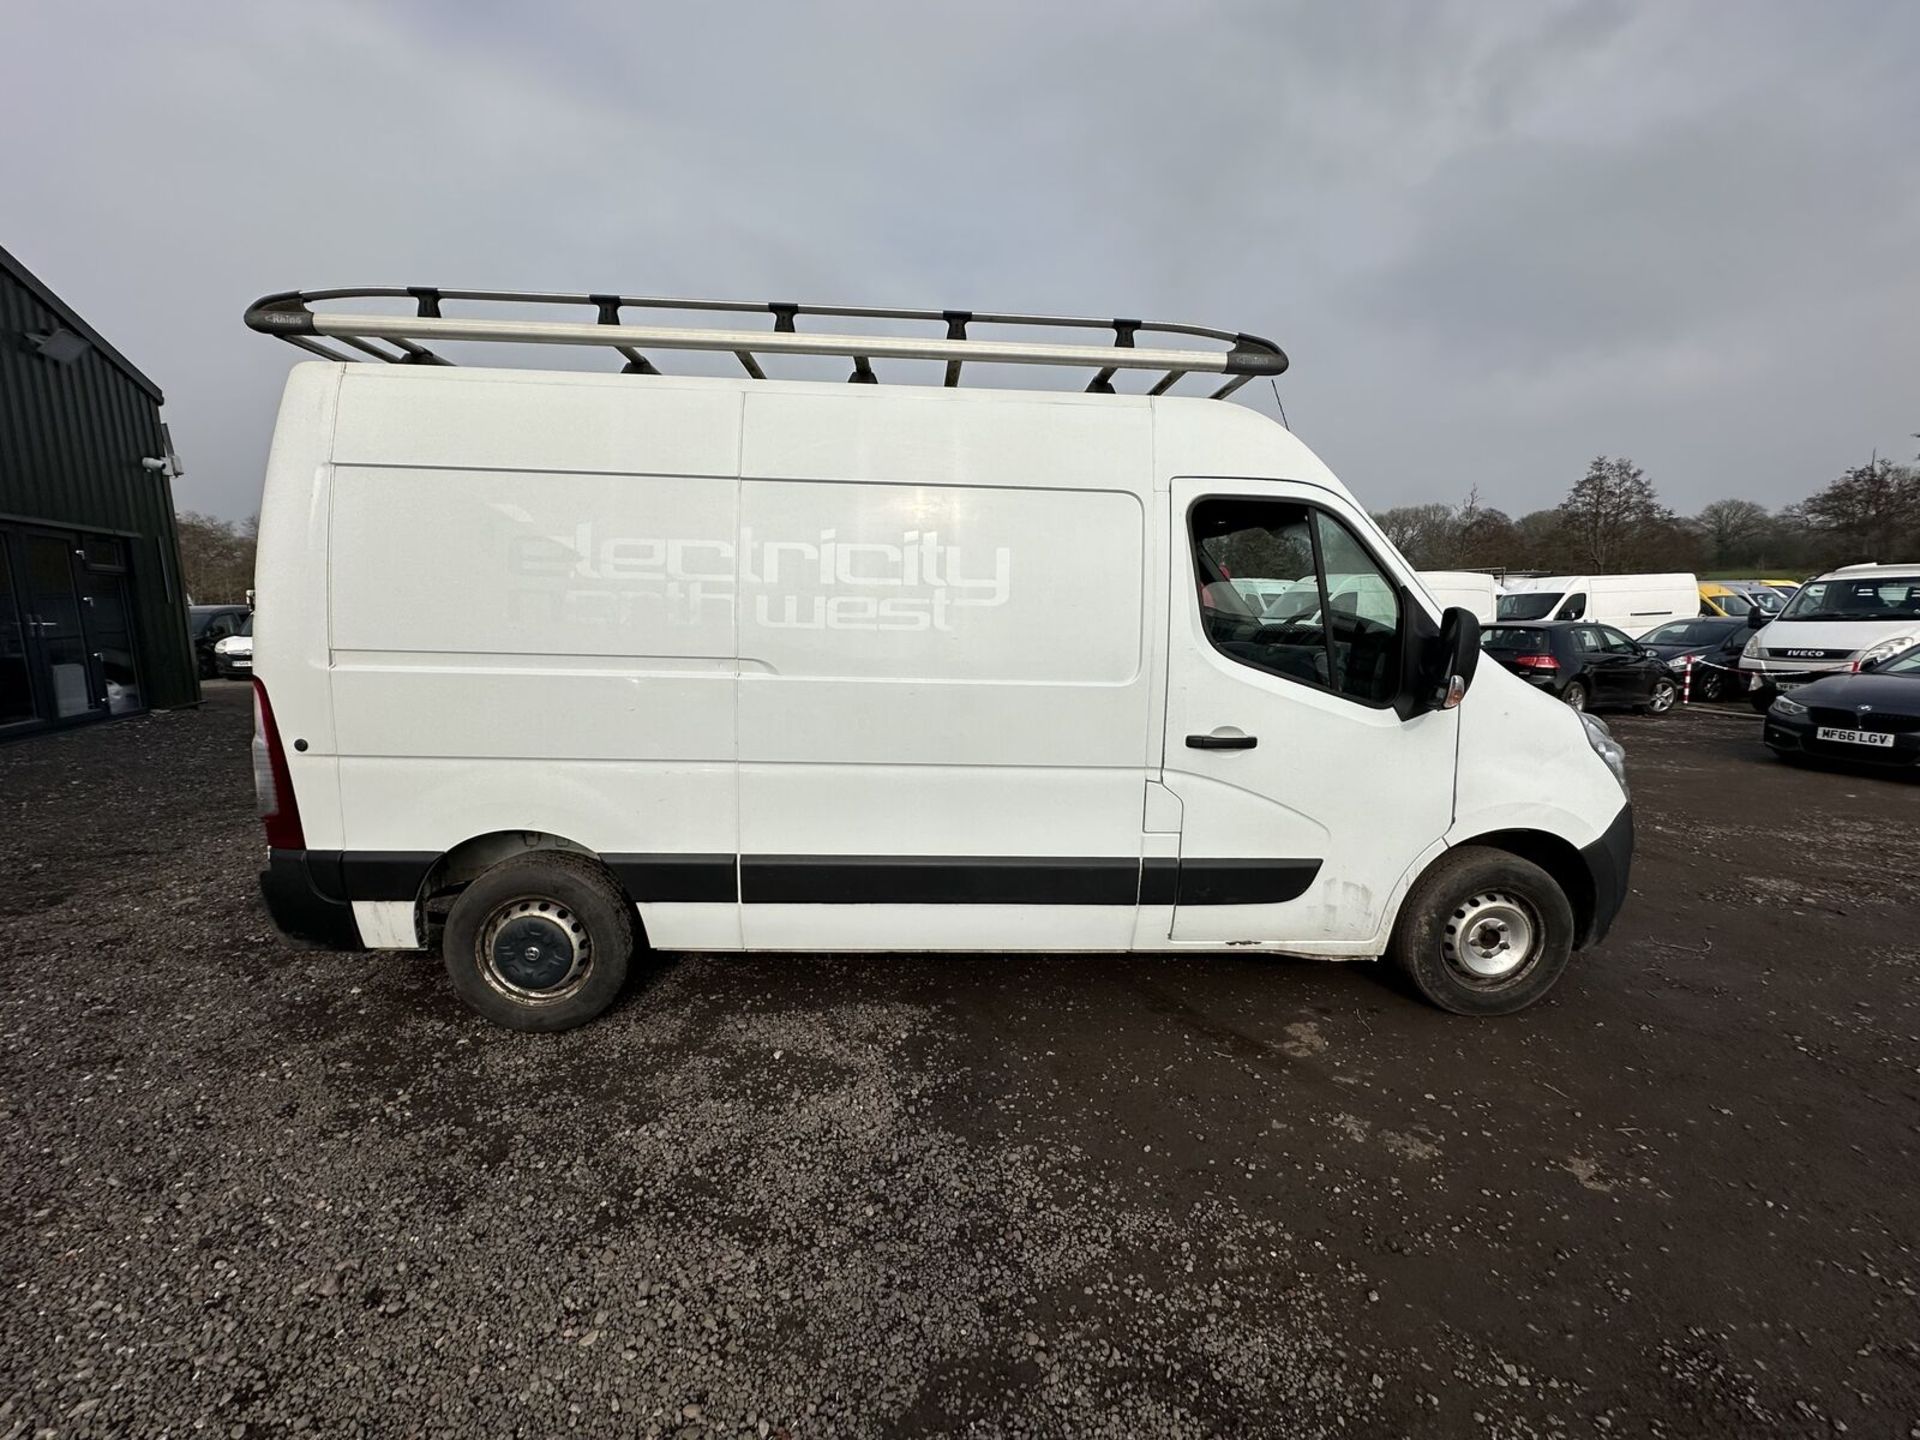 TRUSTY TRANSPORTER: 2015 VAUXHALL MOVANO - BUILT FOR BUSINESS - Image 4 of 20